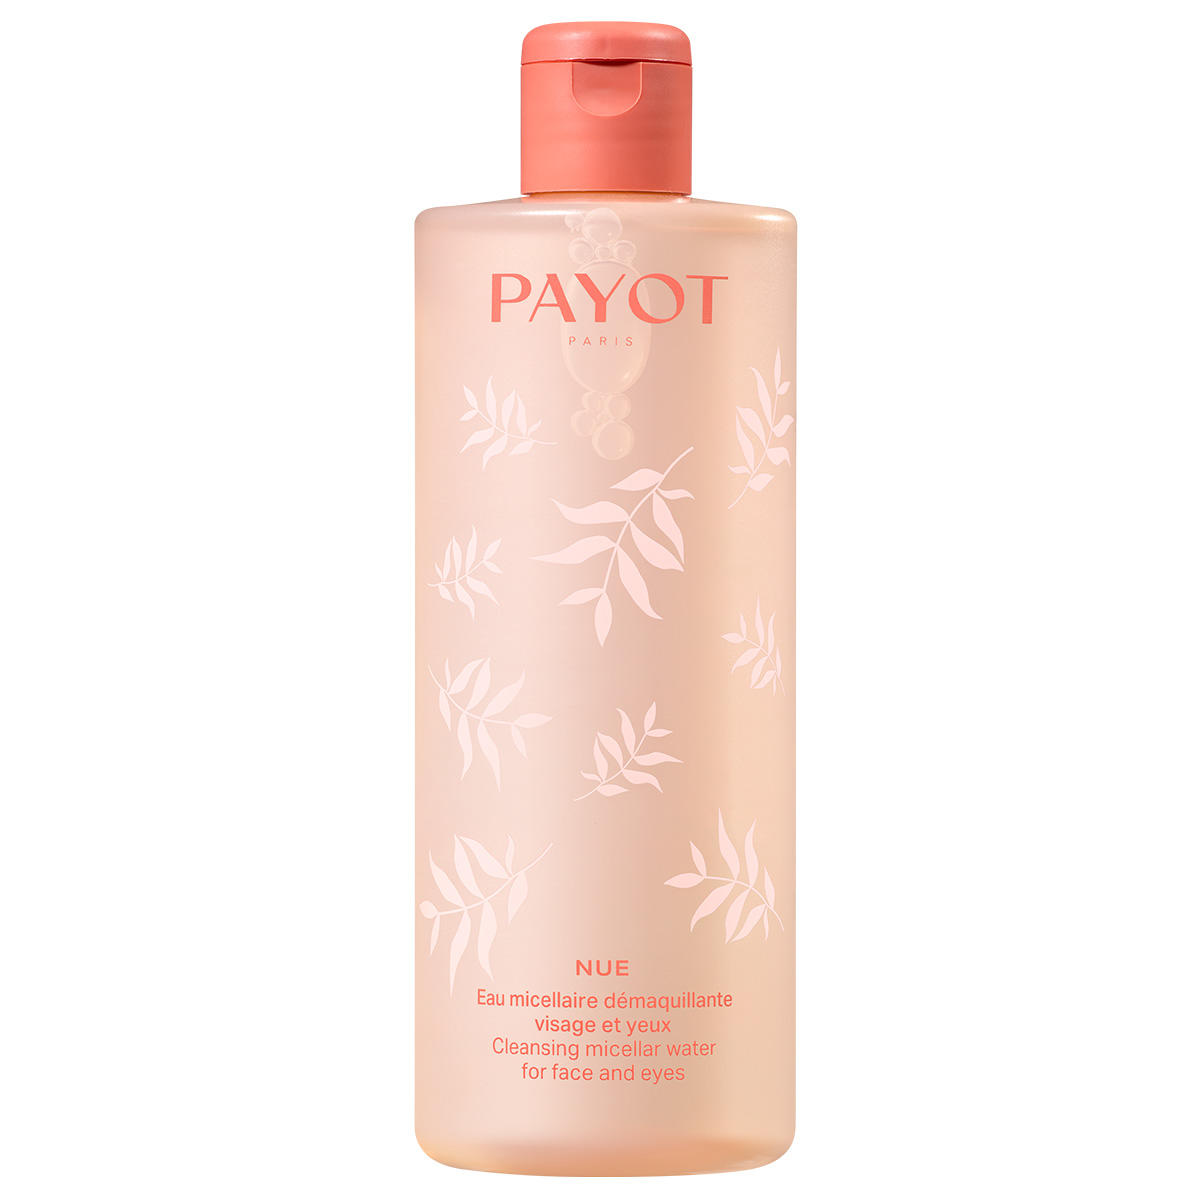 Payot Nue Eau micellaire démaquillante Limited Edition 400 ml - 1